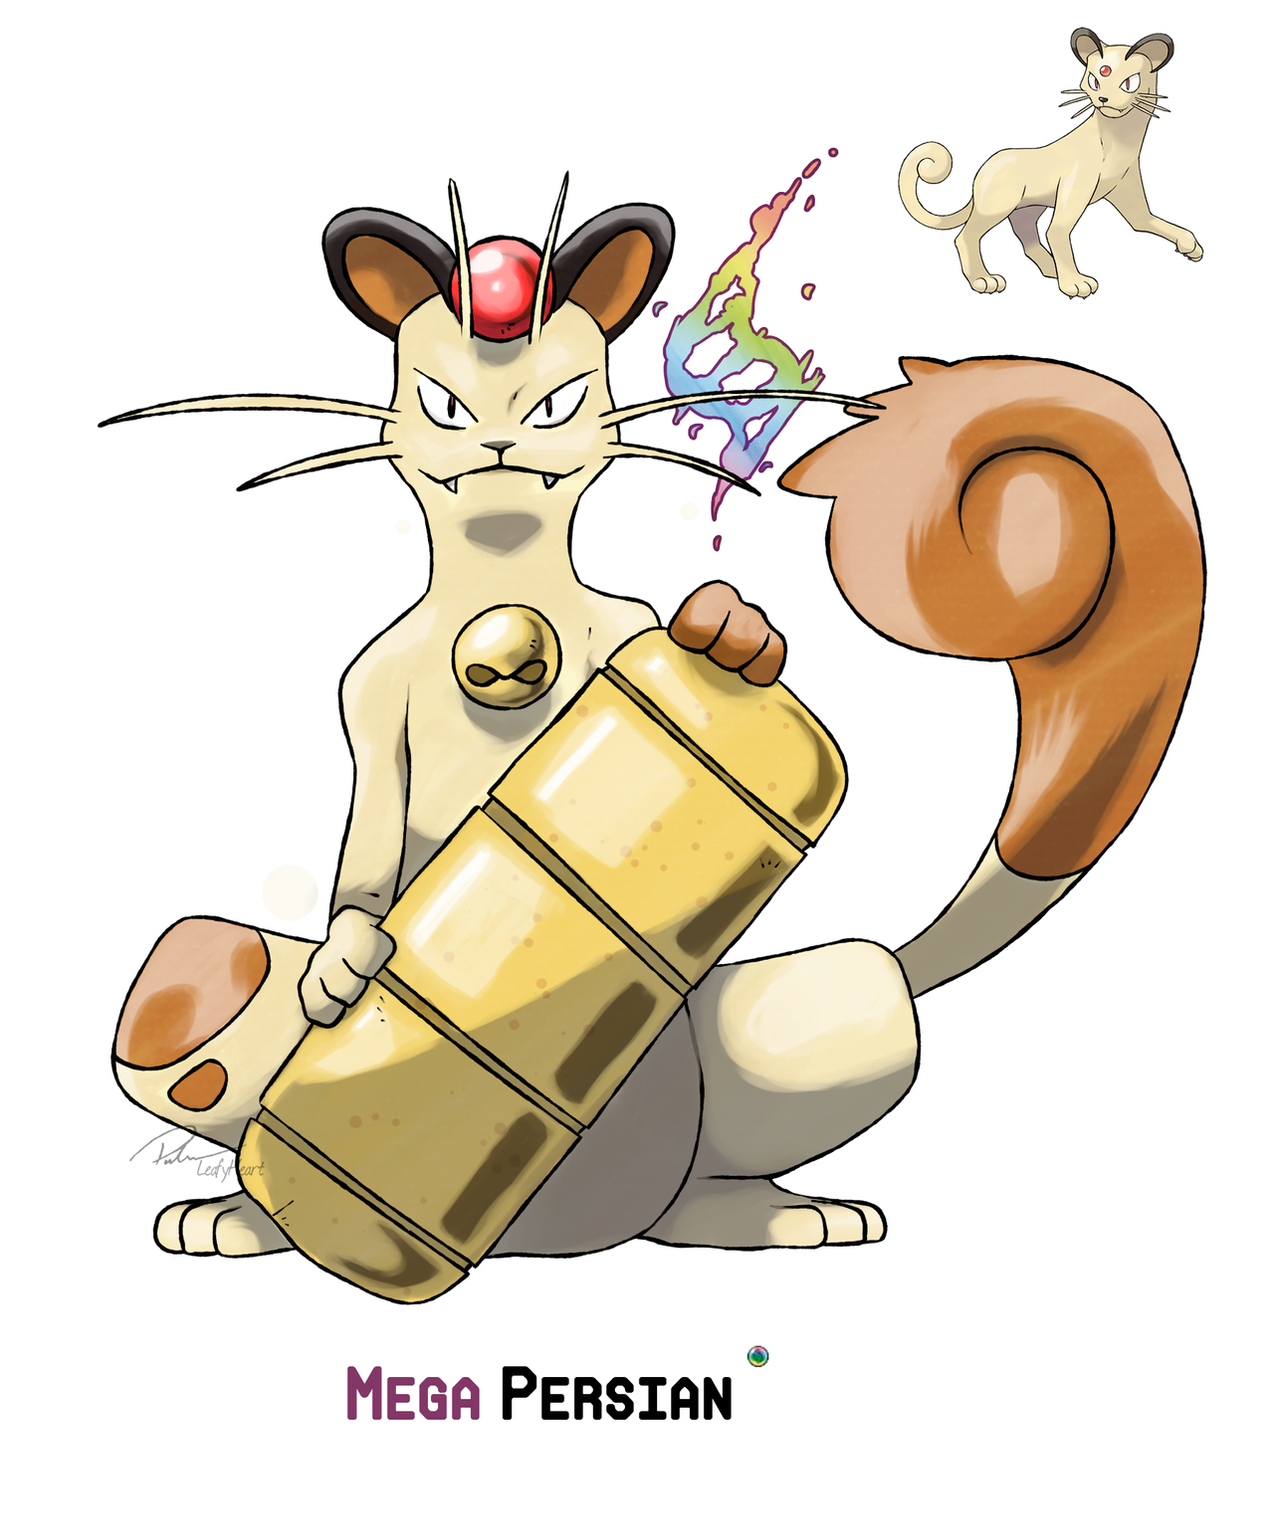 mega_persian_by_leafyheart-d8p8yh3.png